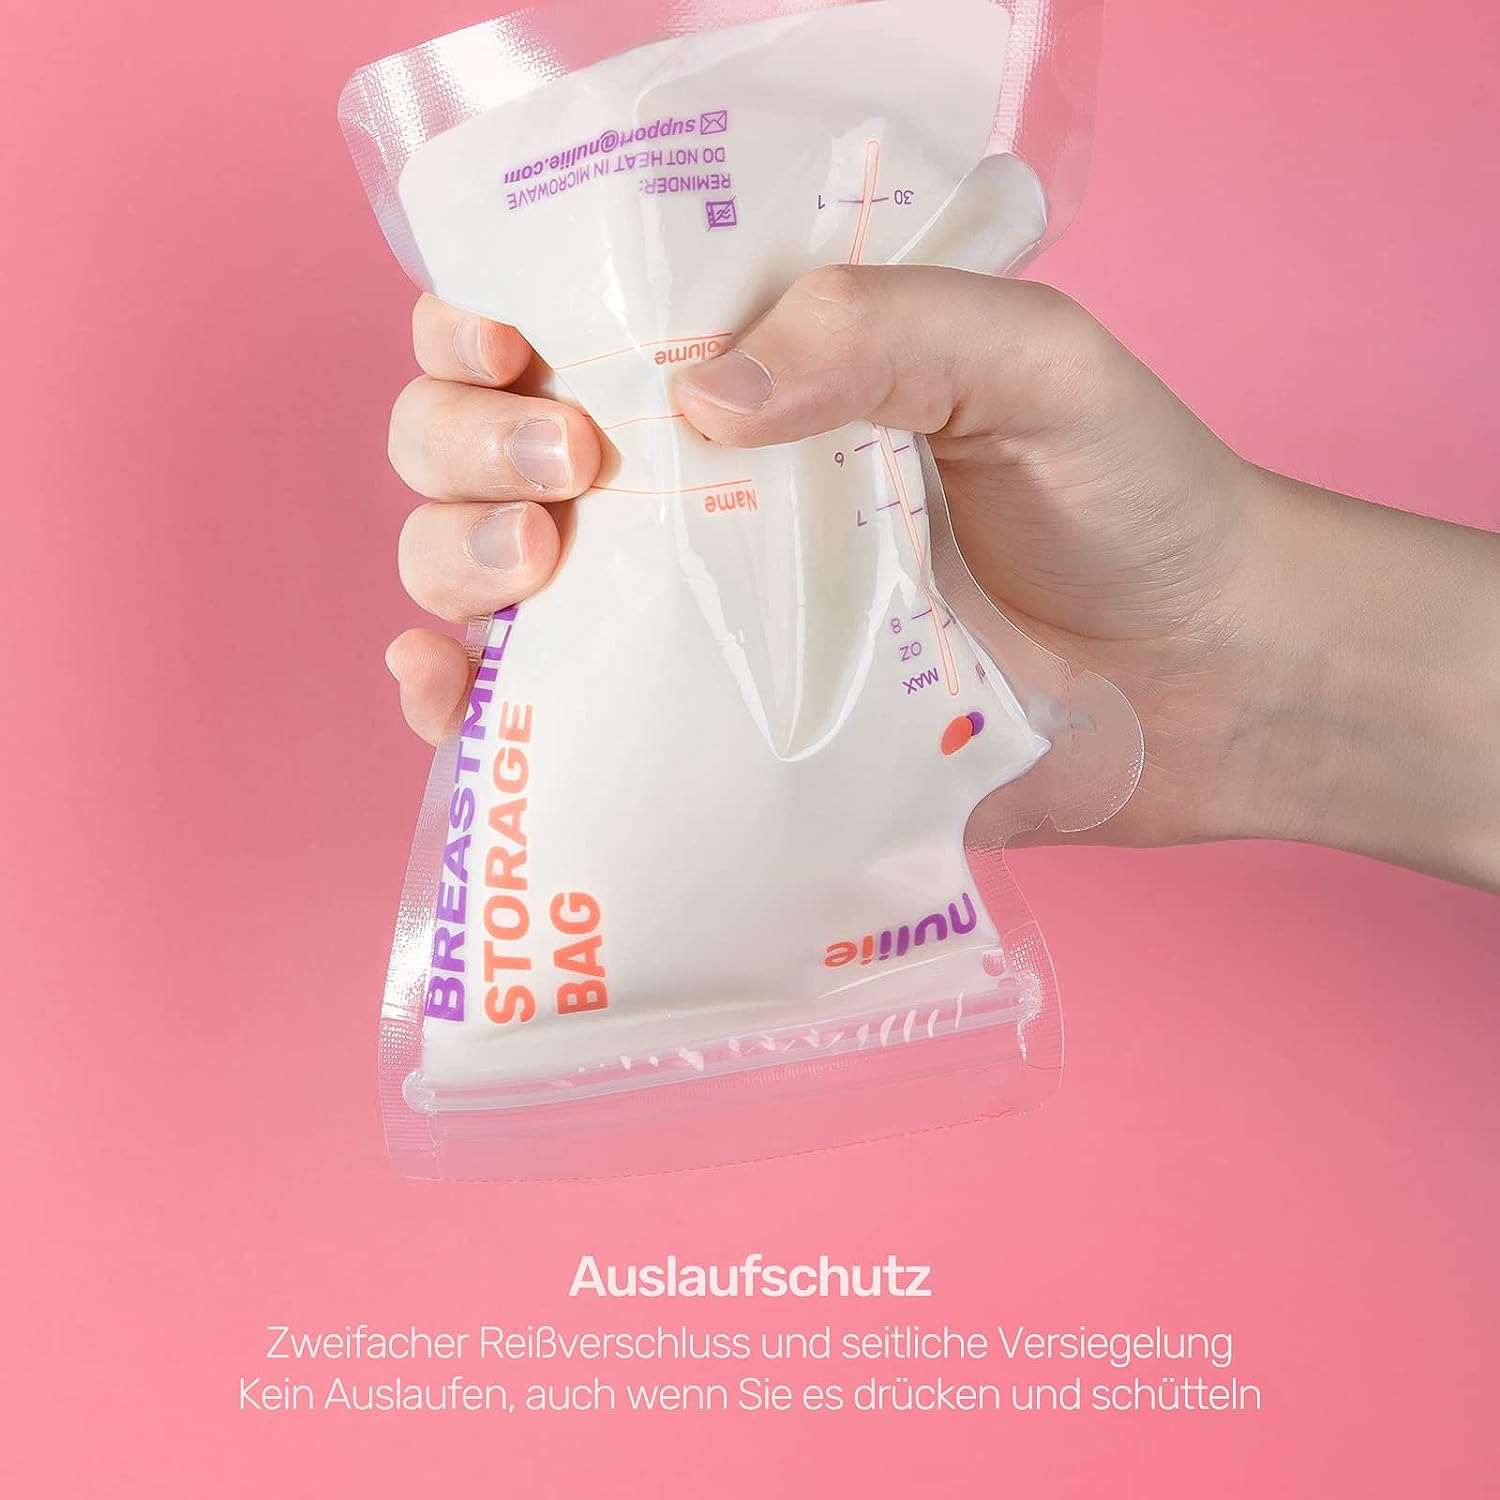 Nuliie Pack of 120 breast milk bags, 250 ml, BPA-free breast milk storage bag, milk bag for breast milk with pouring spout for breastfeeding, self-standing, can be frozen, space-saving